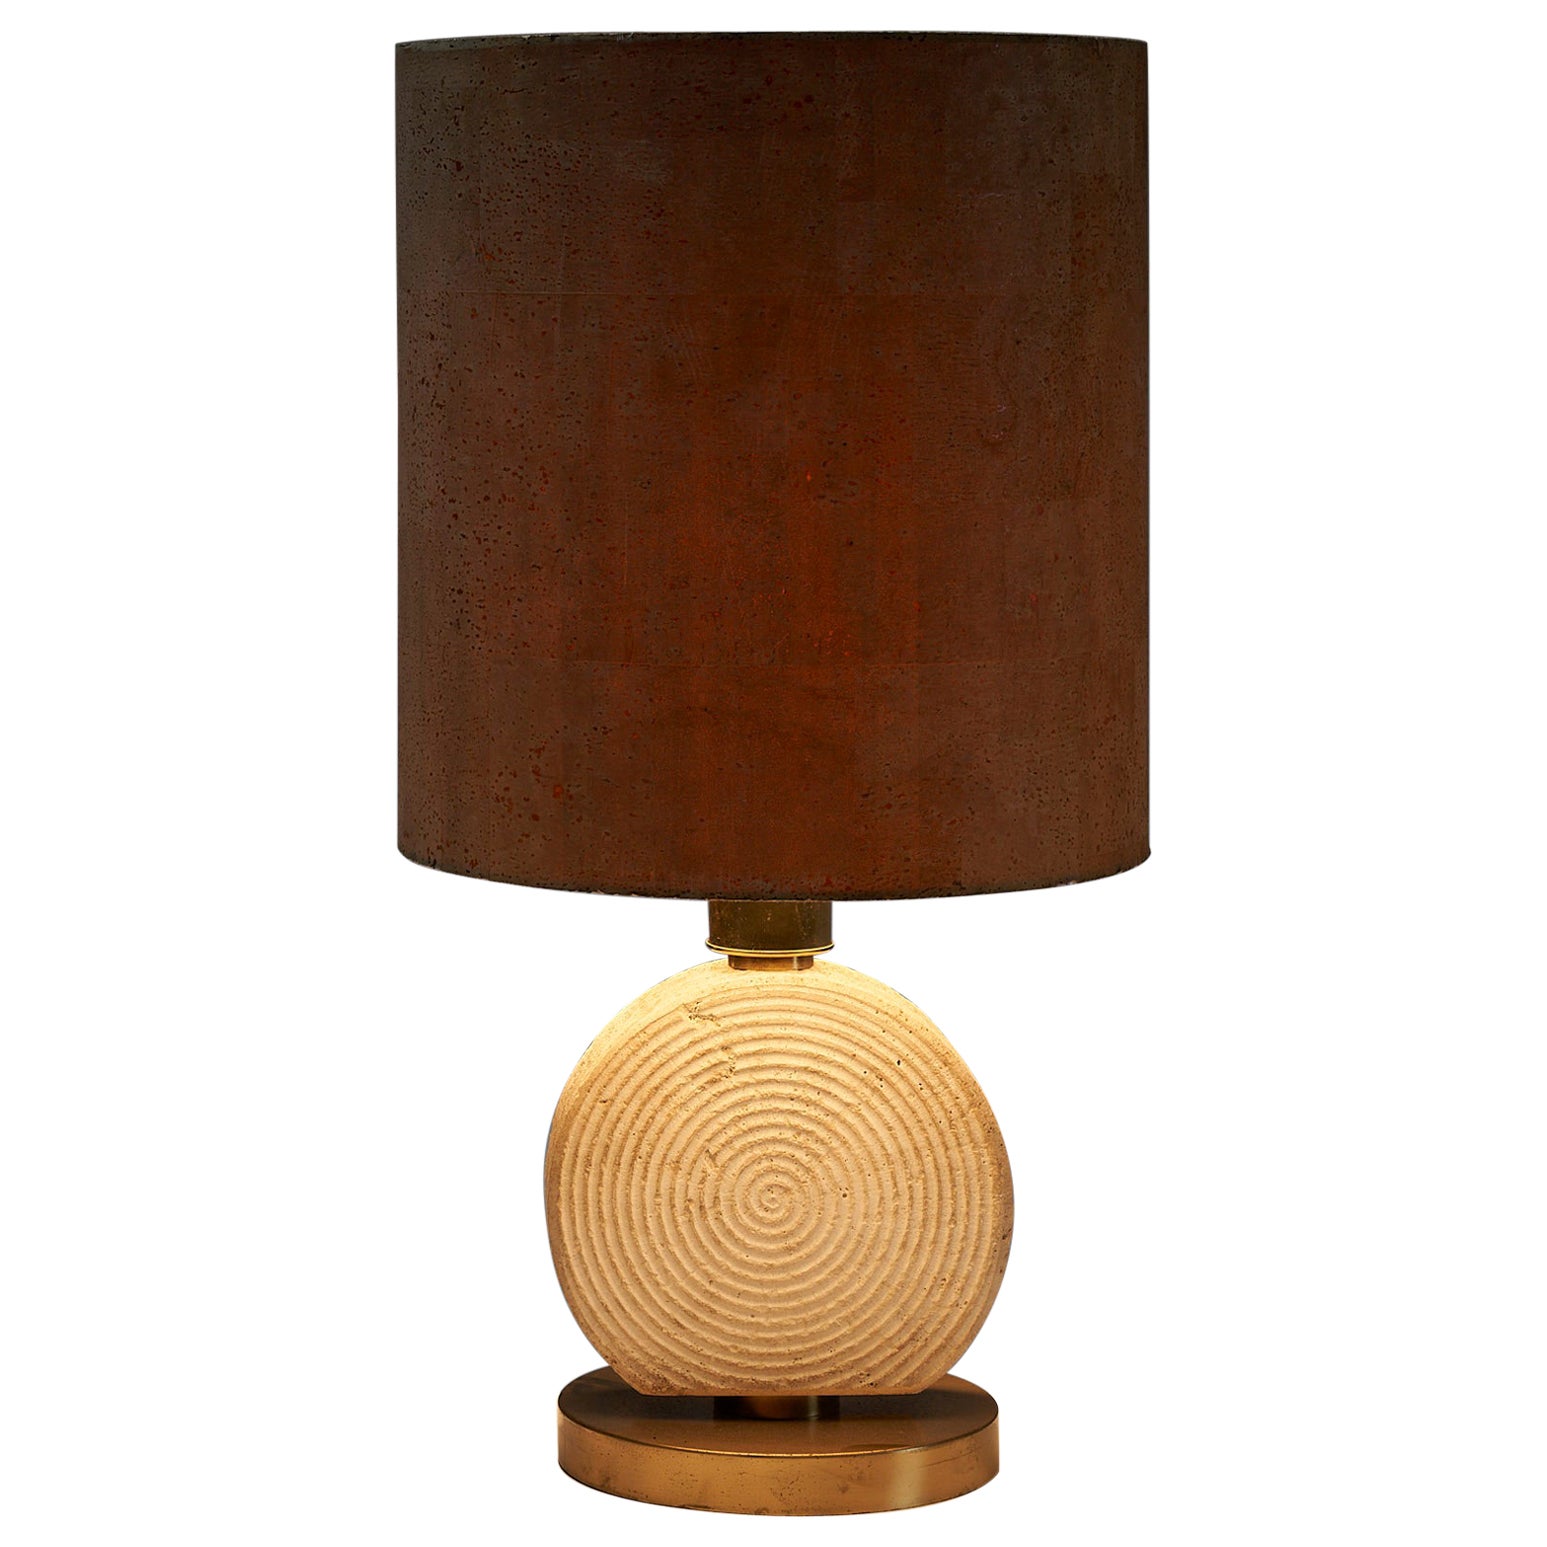 Naturel table lamp travertine base cork shade in the style of Studio CE.